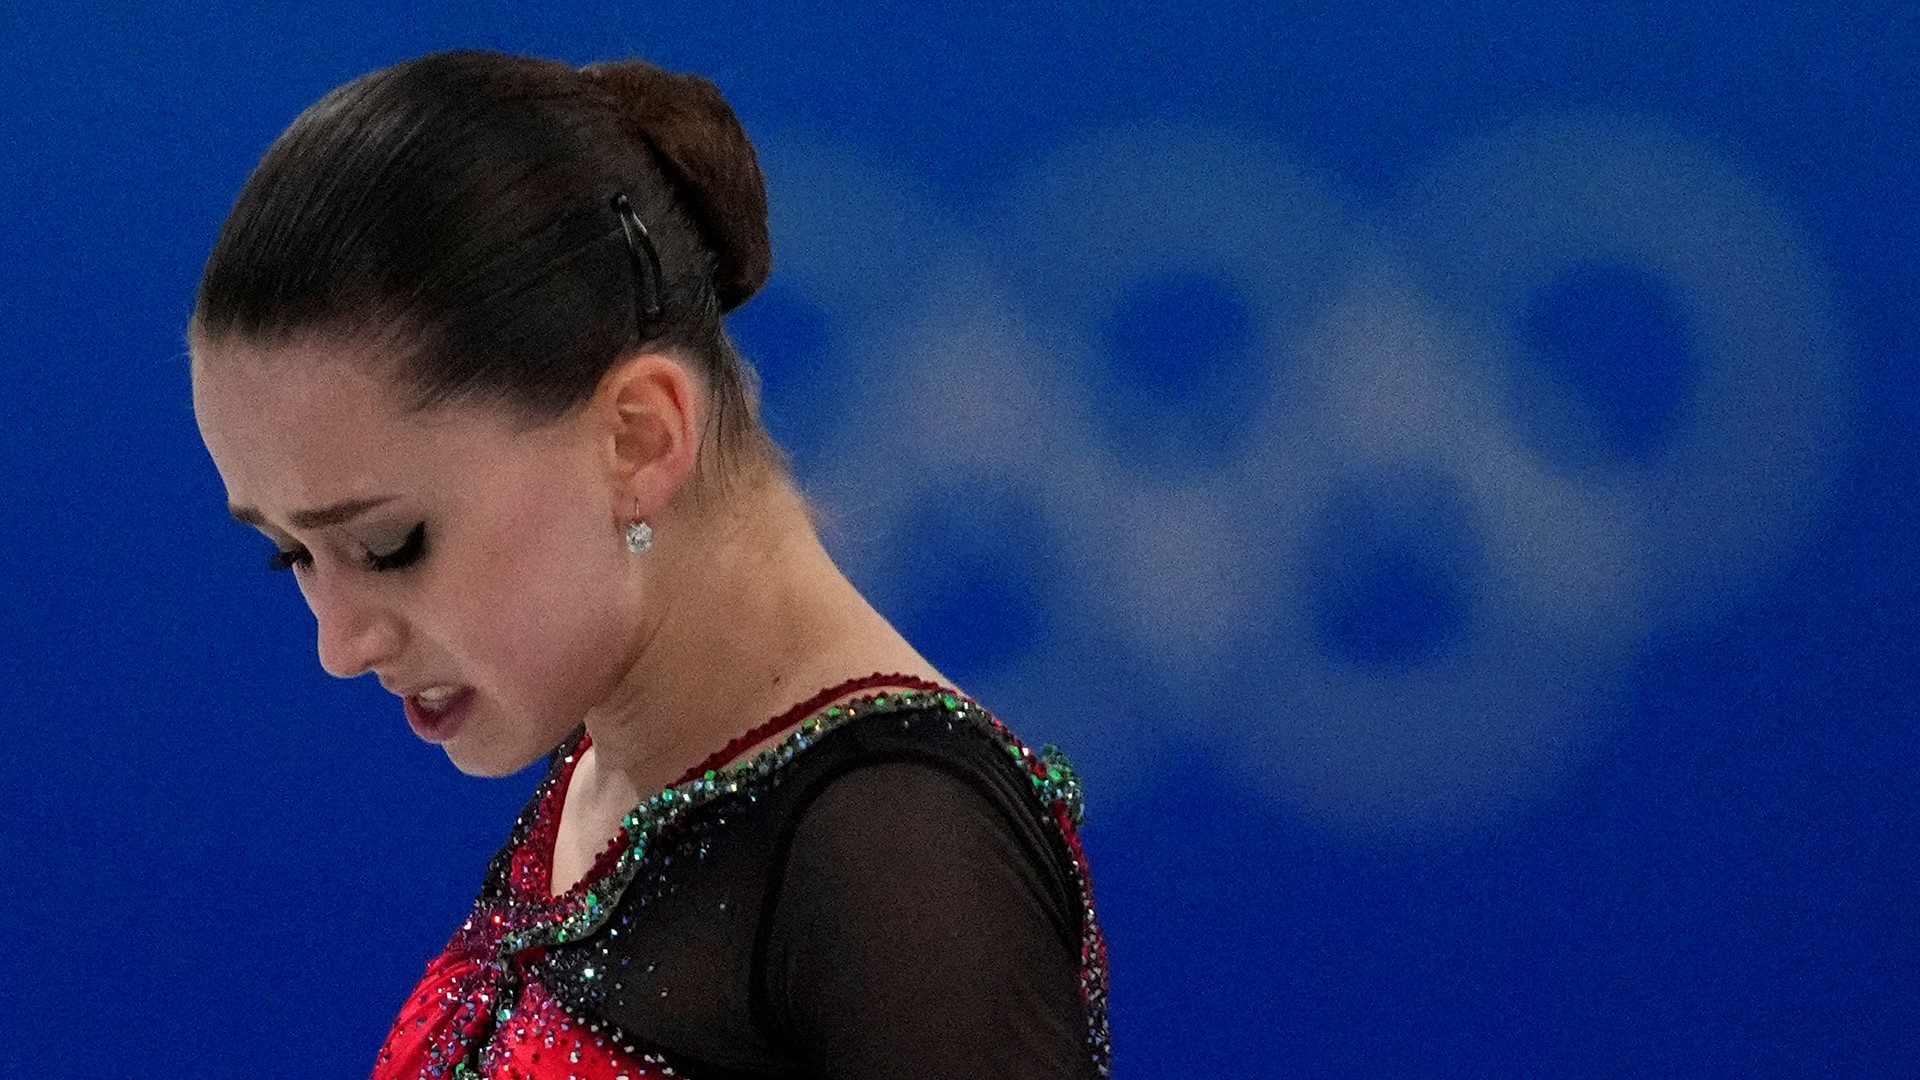 The Beijing Olympics women's figure skating competition ended in emotional chaos while an American-born action-sports star made history.